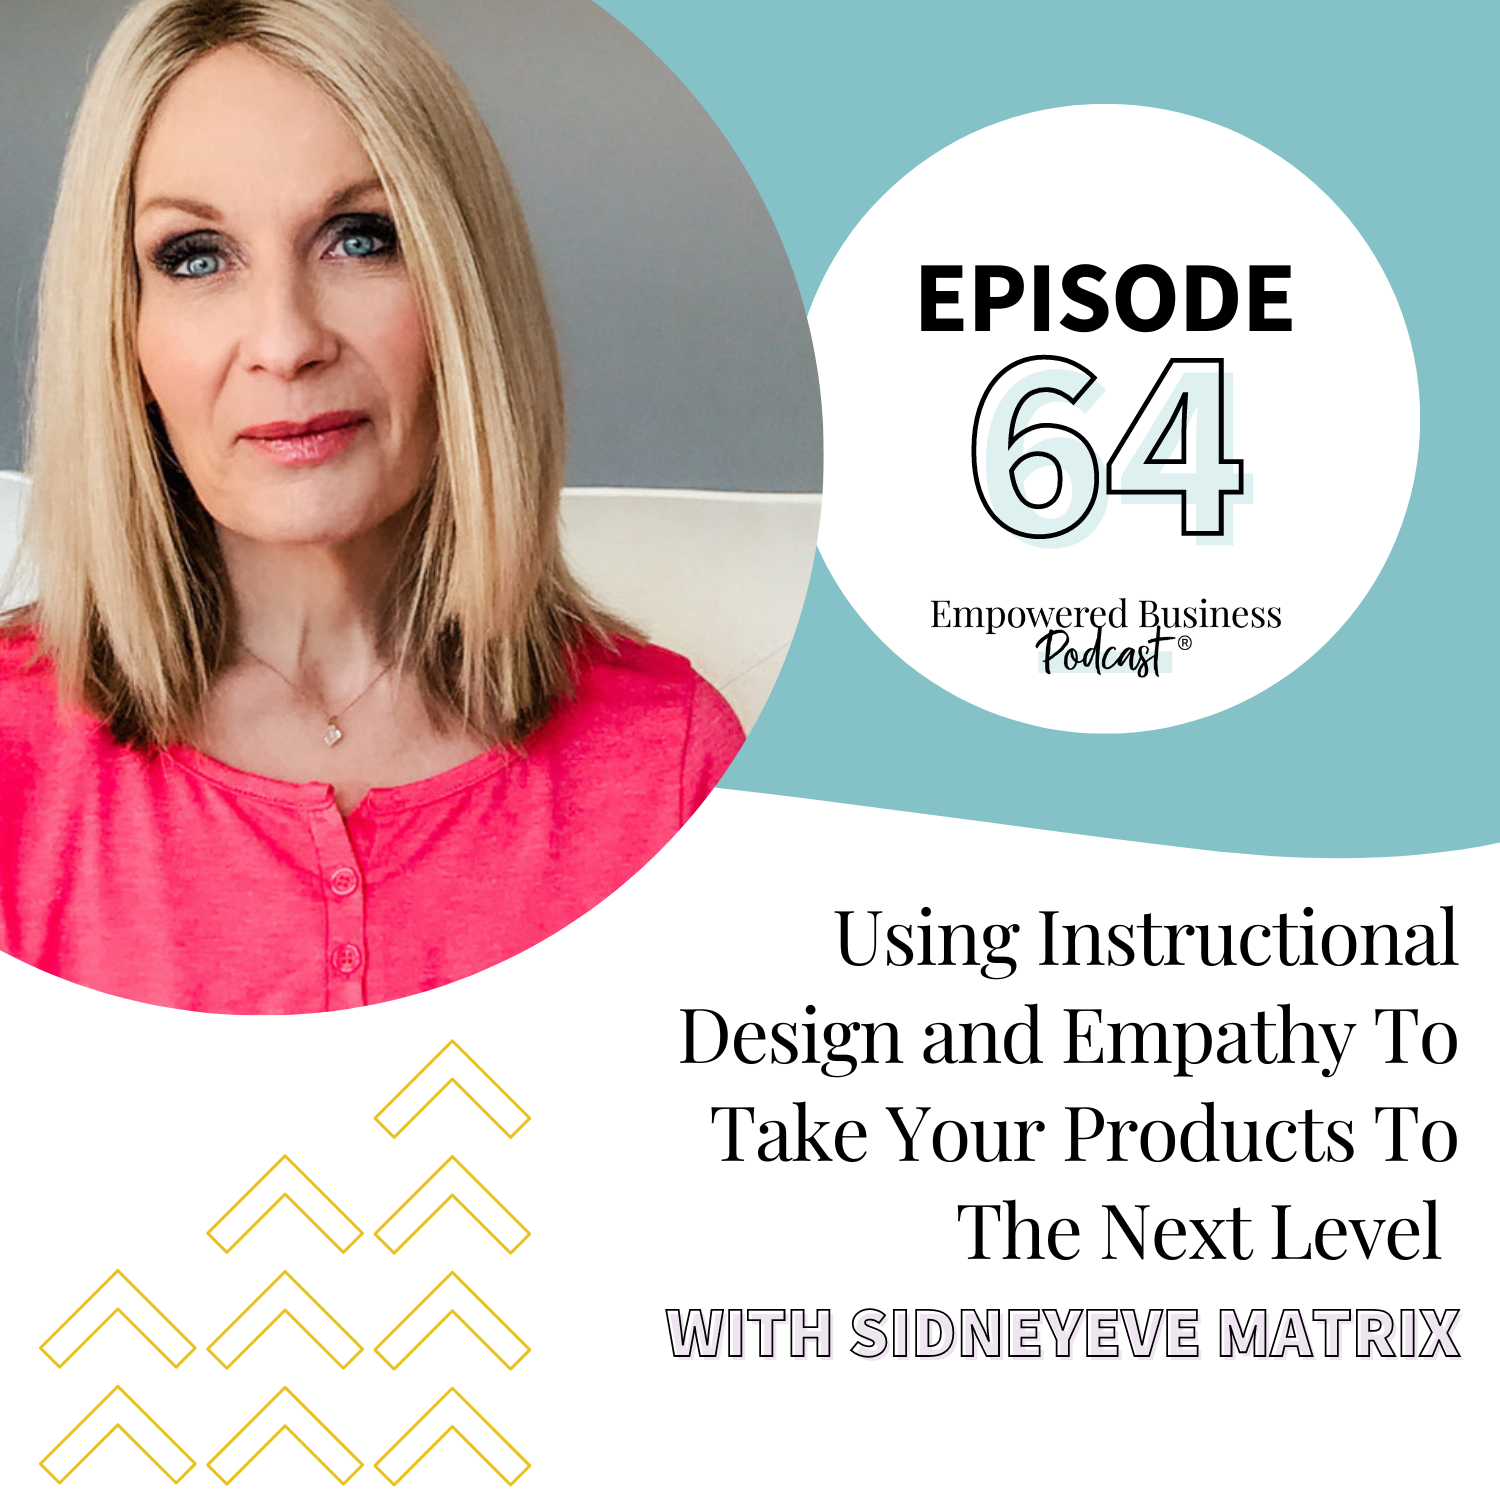 Using Instructional Design and Empathy To Take Your Products To The Next Level with Sidneyeve Matrix